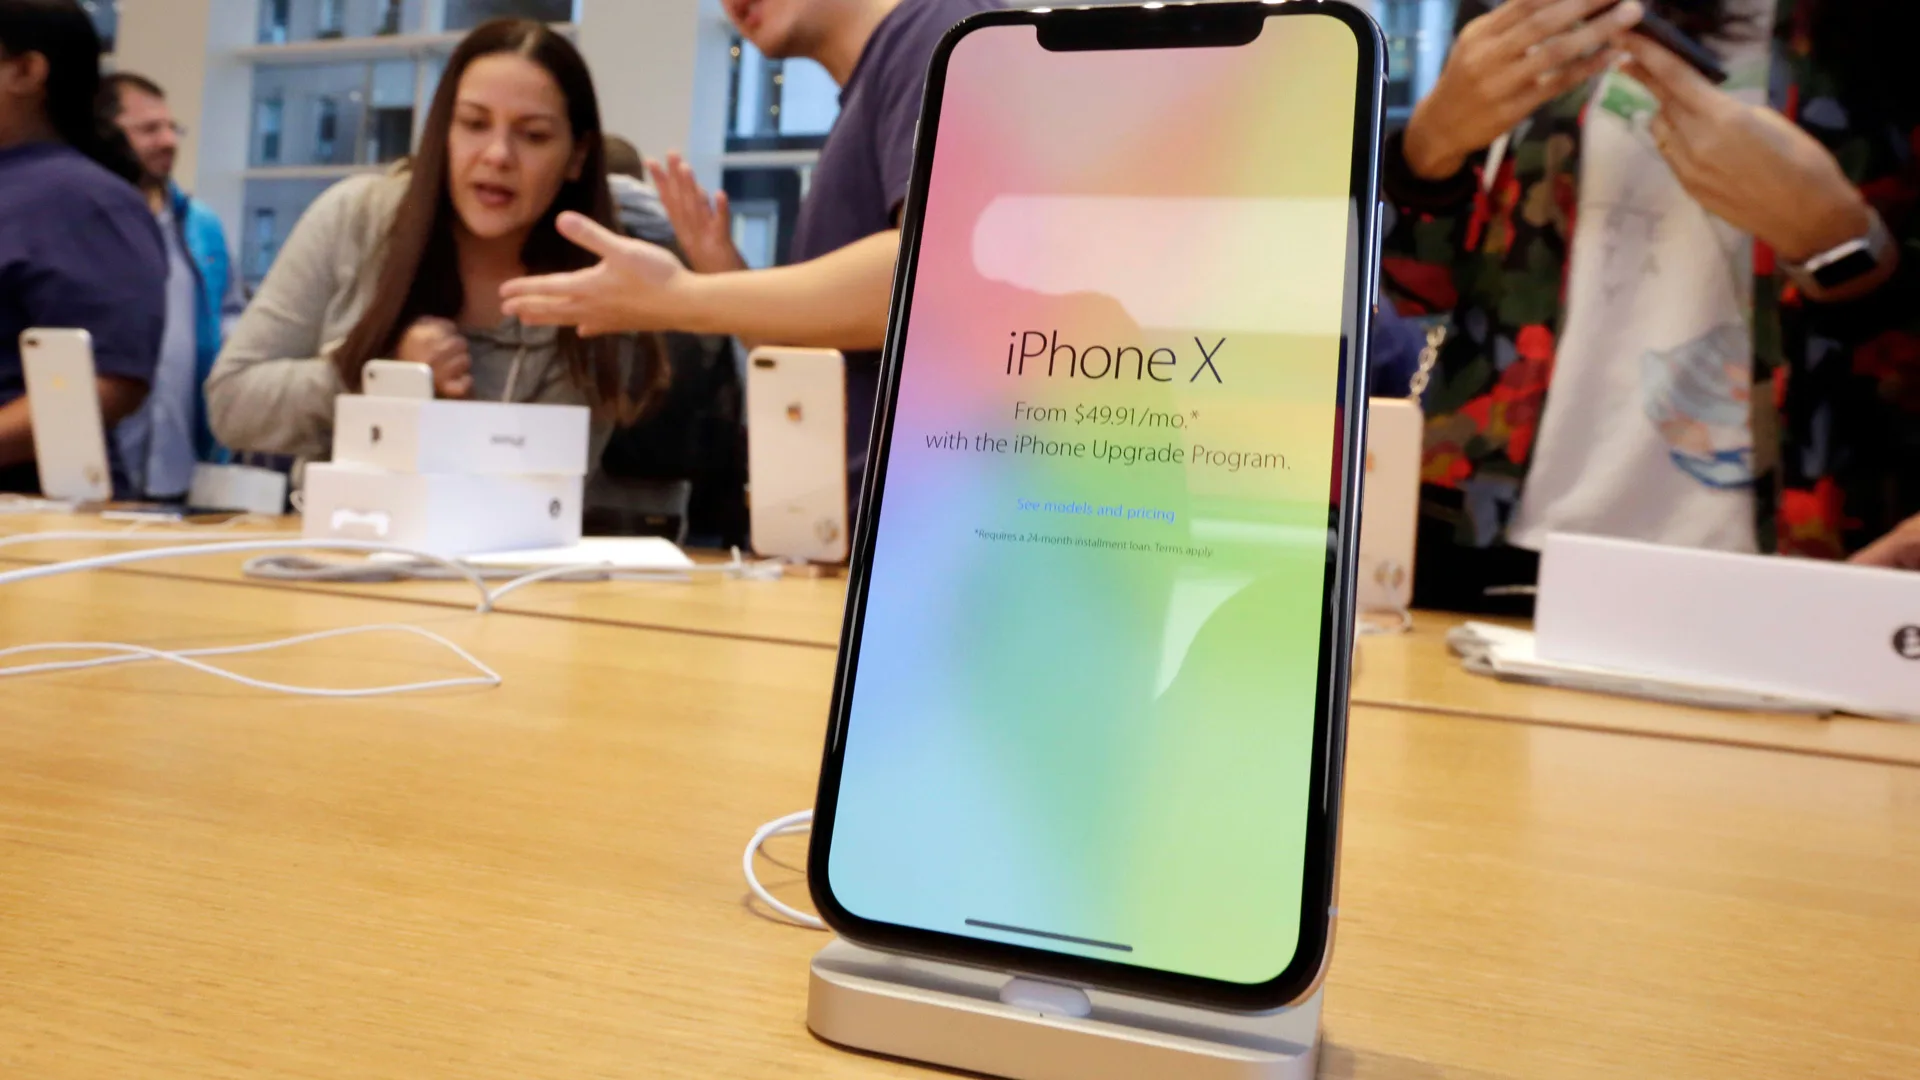 A photo of the iphone X in the apple store on a stand with the screen saying iPhone X and a rainbow background